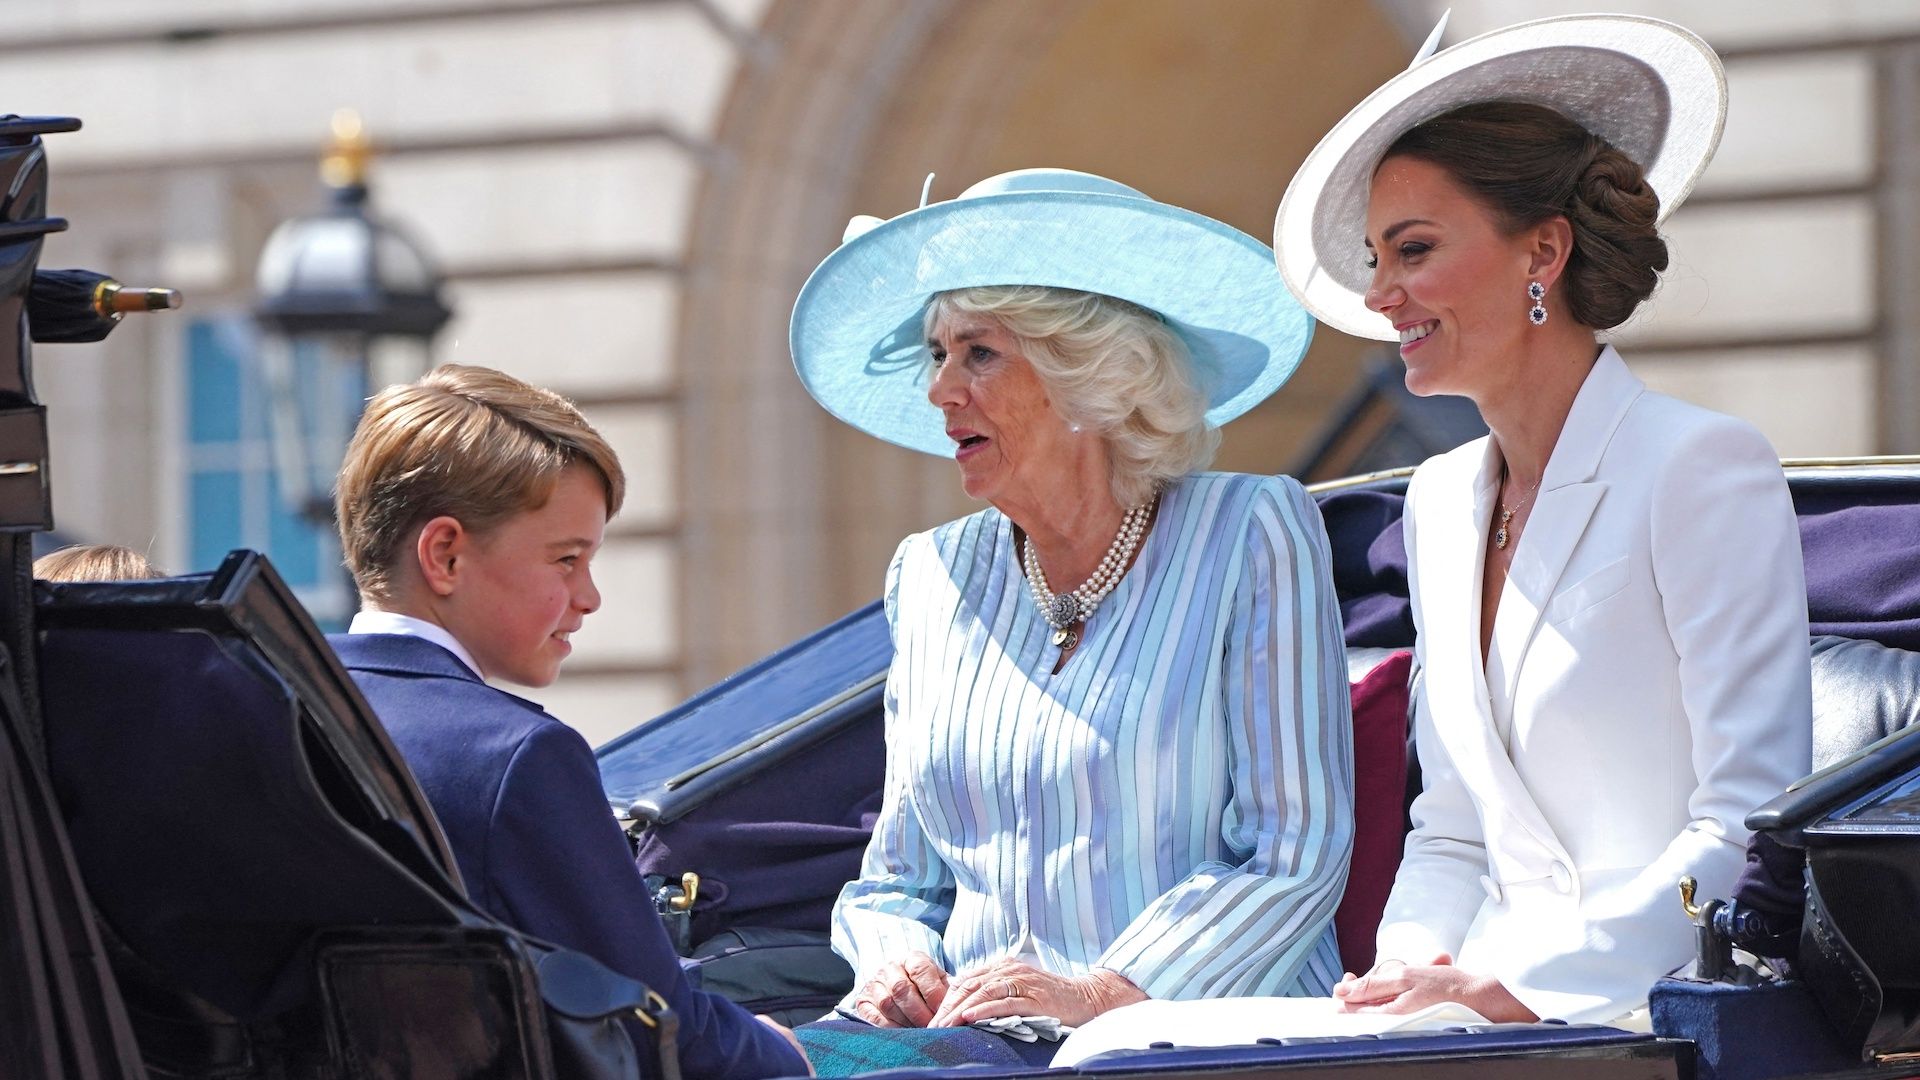 George_Catherine_Camilla_koets_Trooping_the_Colour